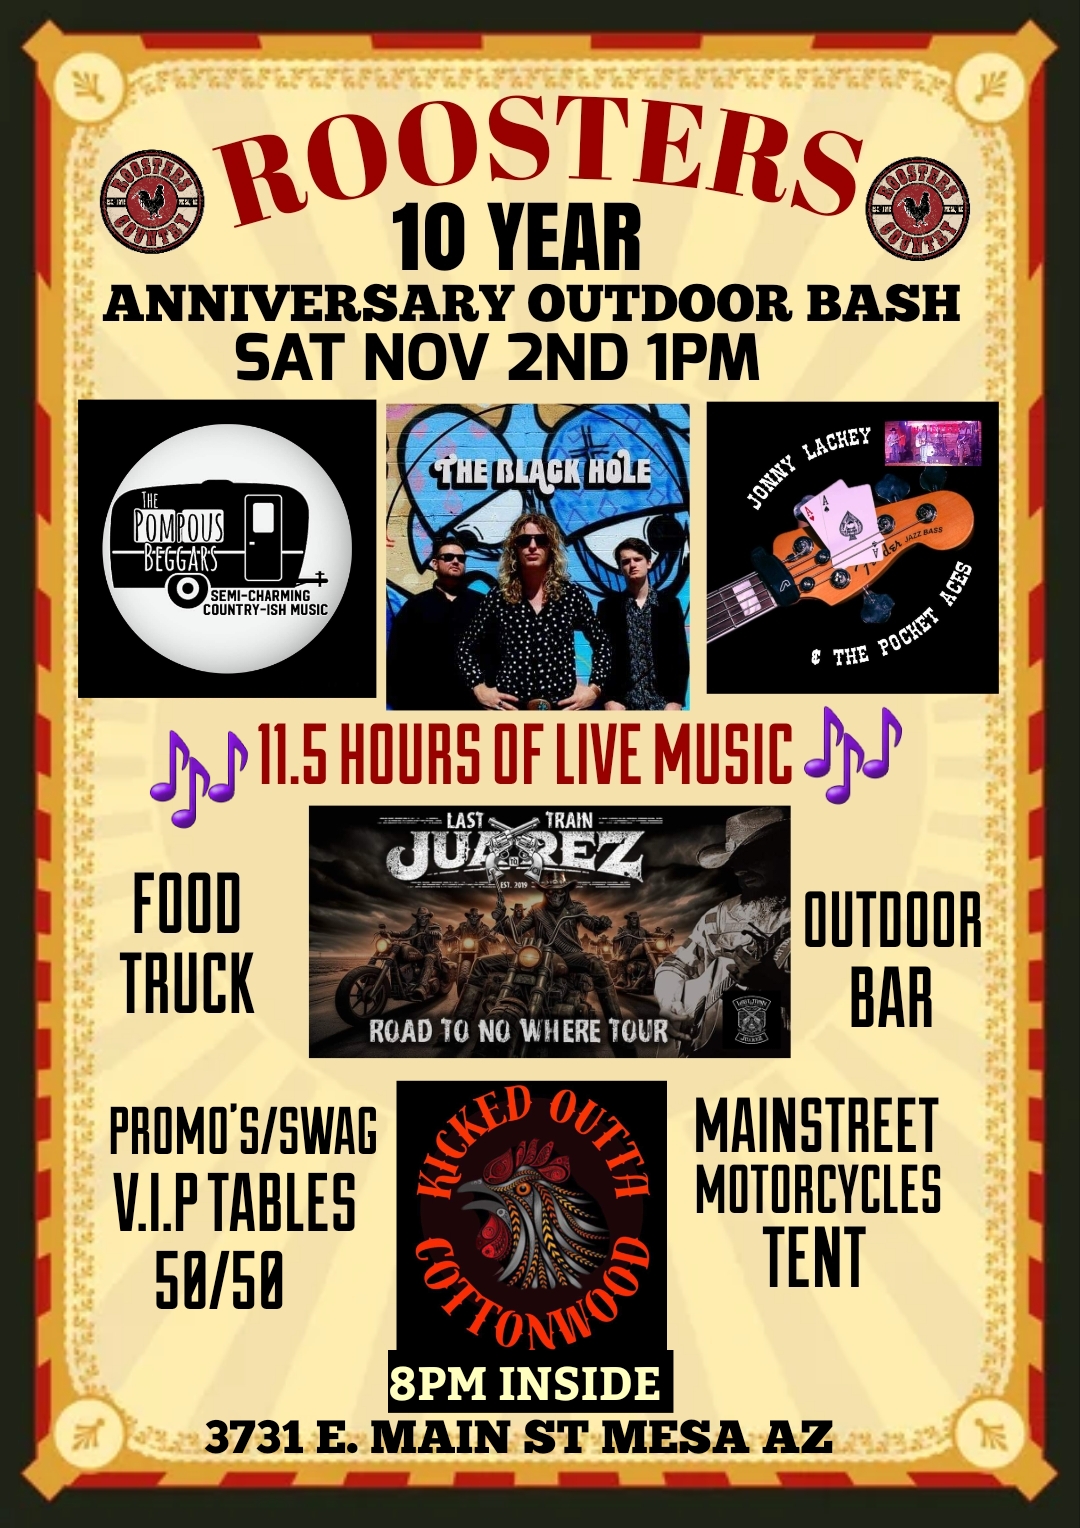 Roosters 10 Year Anniversary Outdoor Bash 11.5 hours of Live Music